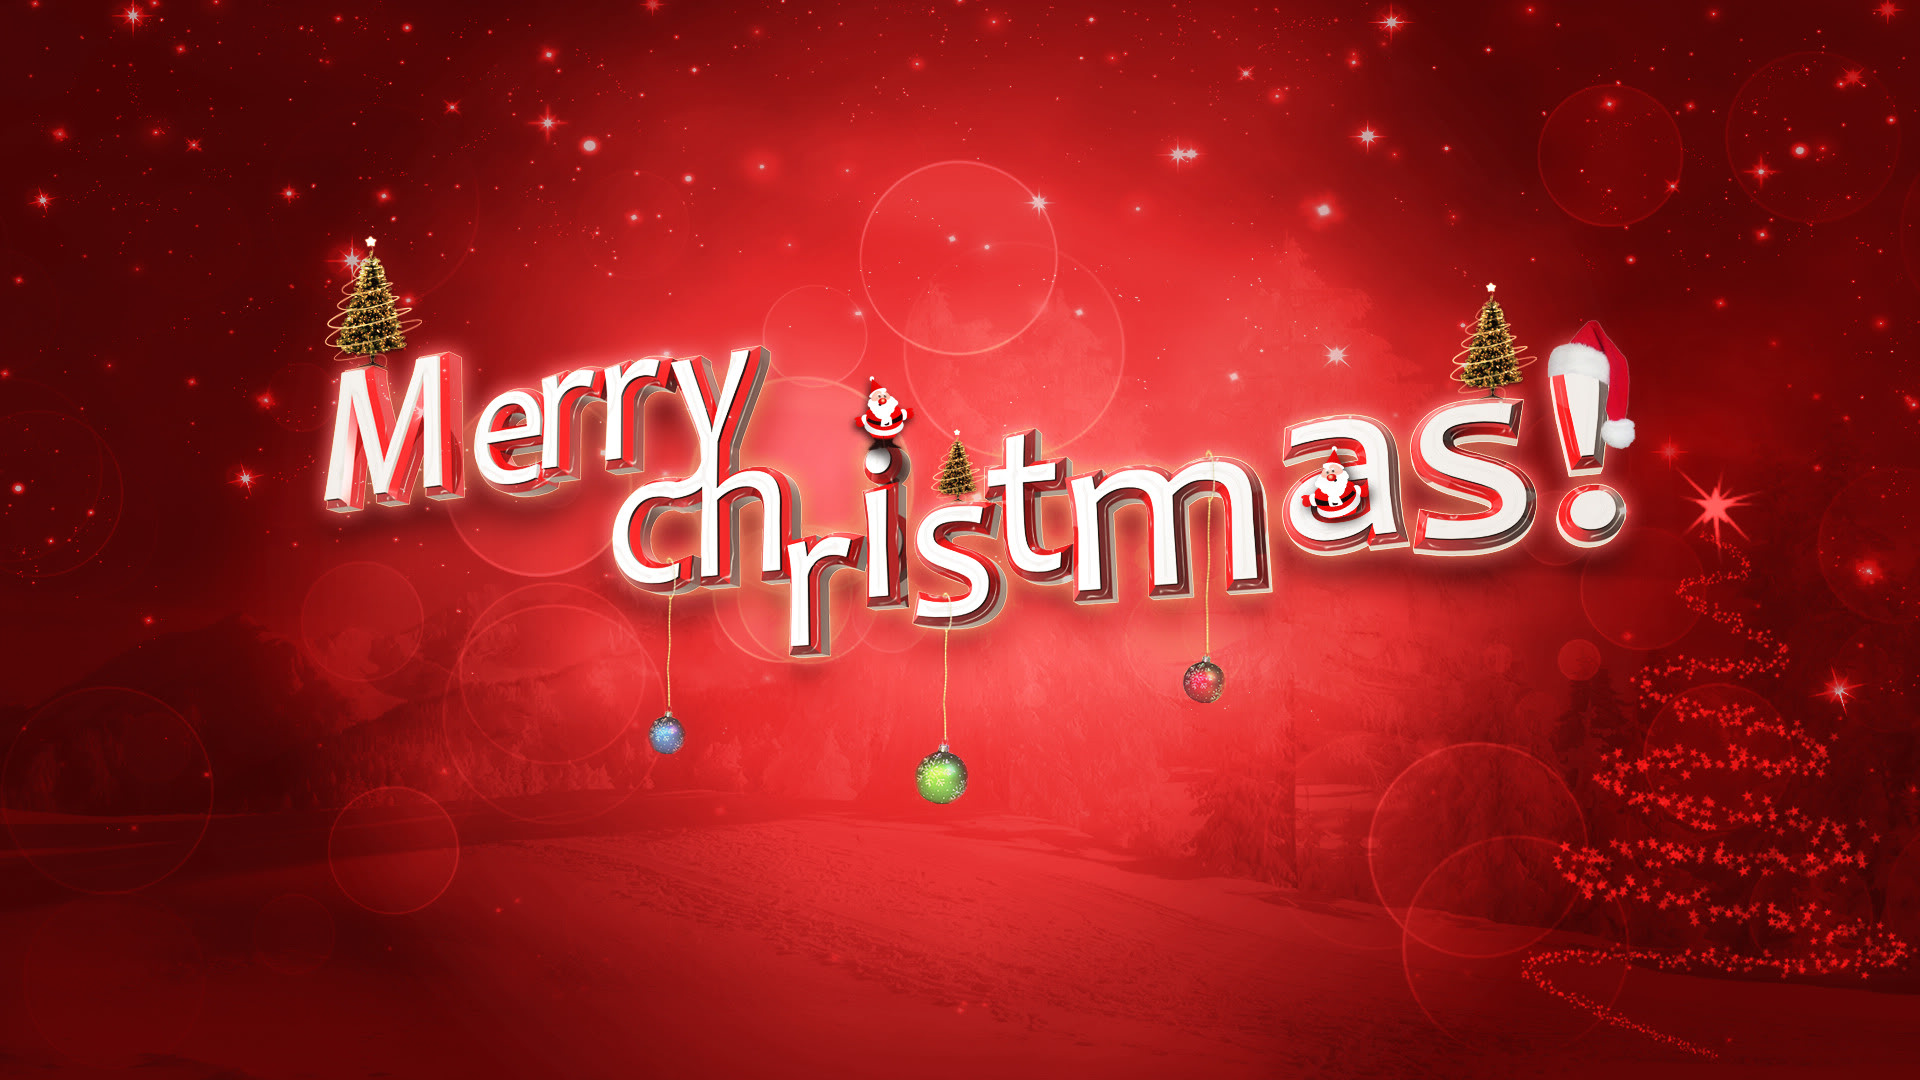 Advance Merry Christmas 2016 Images Pictures Whatsapp dp 1920x1080